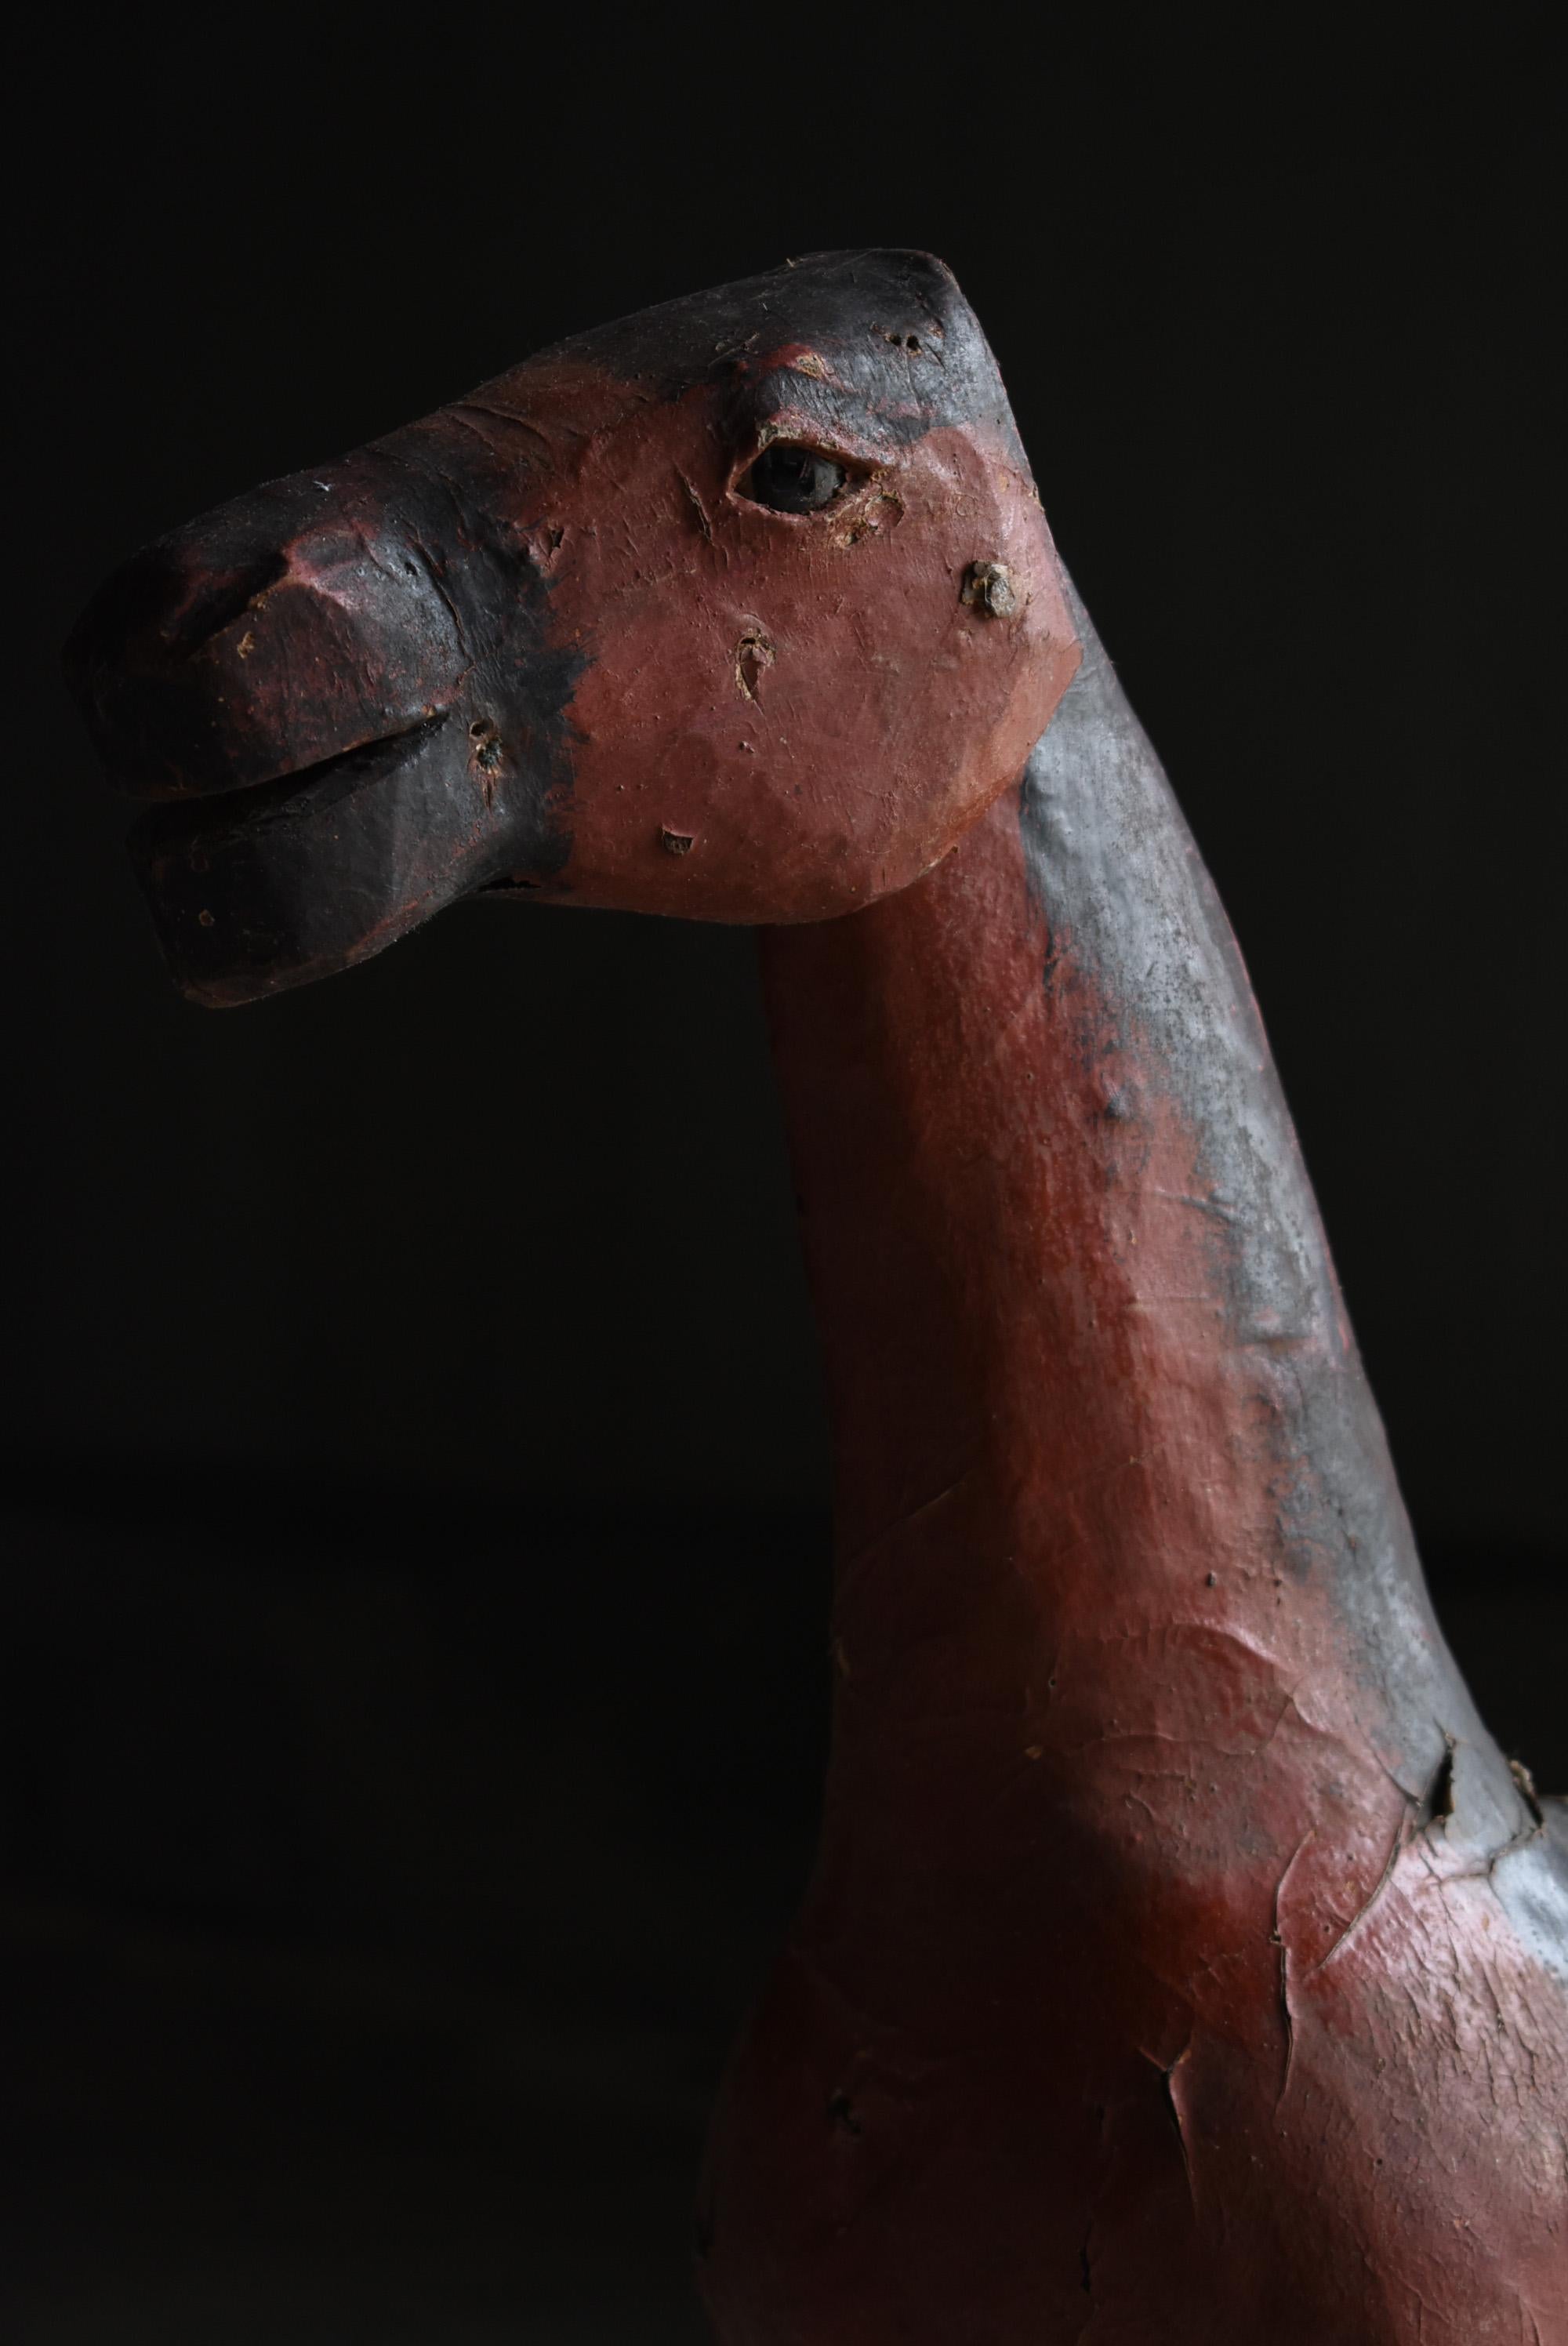 It is an old Japanese wood carving horse.

It is from the Edo period.
It is painted with lacquer.

In Japan, there has been a culture of dedicating horses to shrines for a long time.
In modern times, the culture has faded and no such wood carving